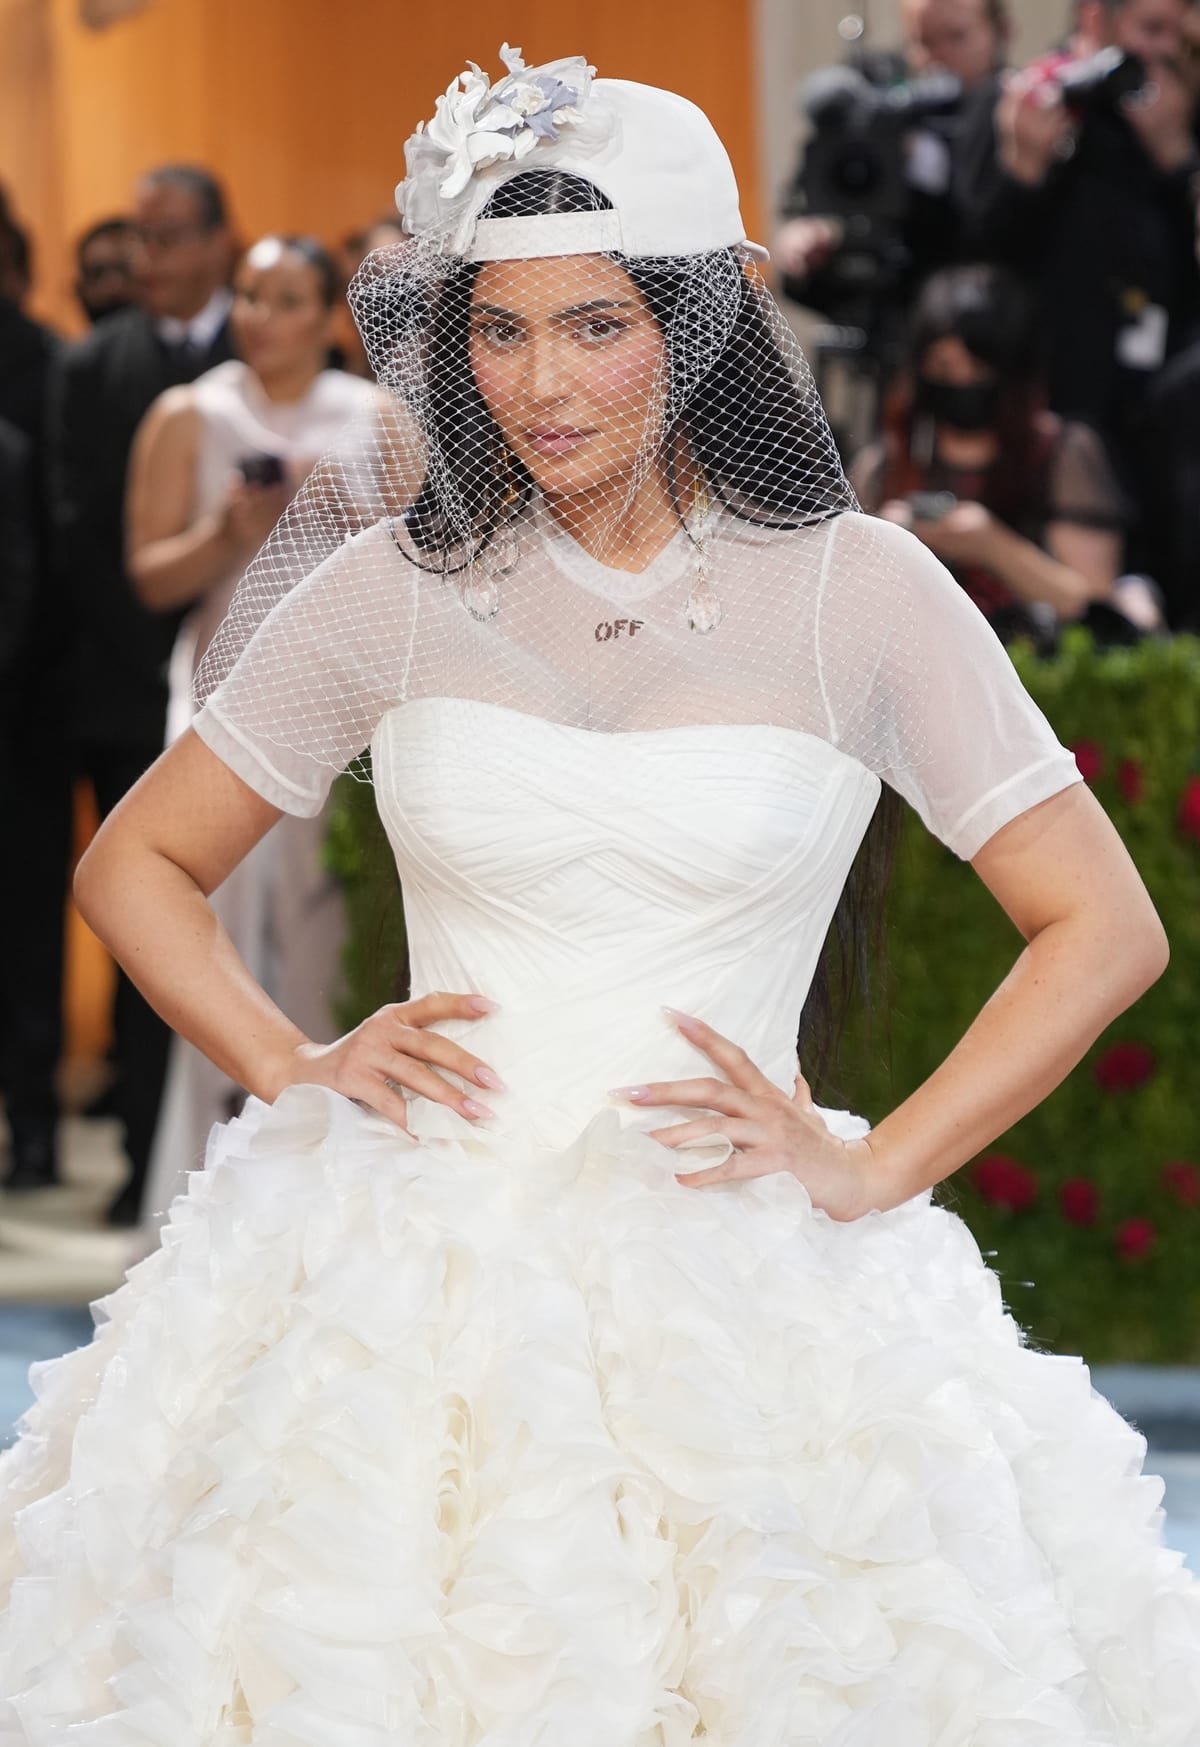 Kylie Jenner wore her wedding dress with a mesh T-shirt featuring the Off-White logo